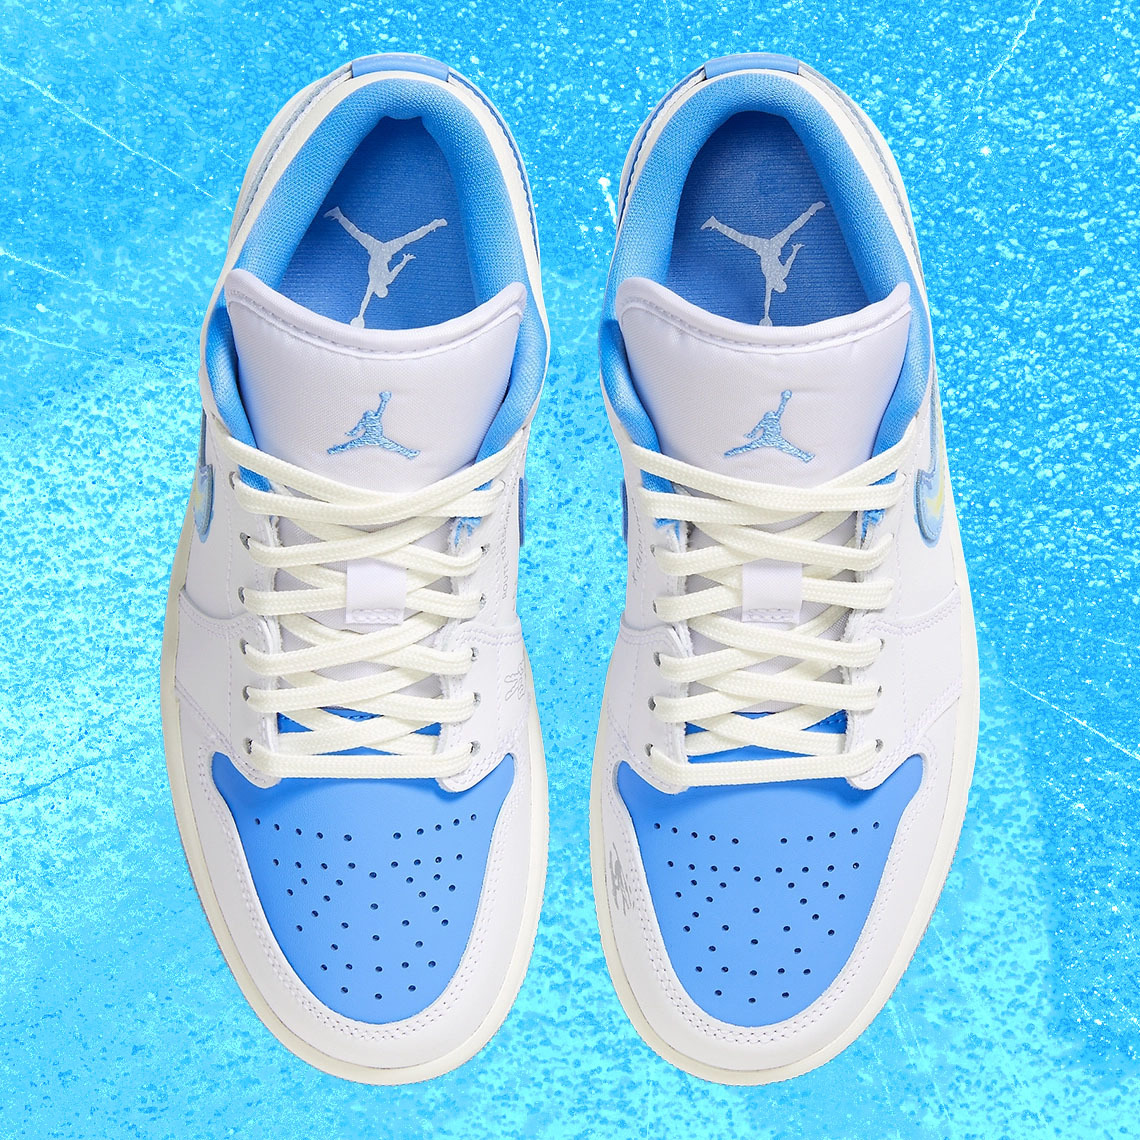 There are New Skate-Themed Air Jordans on the Way